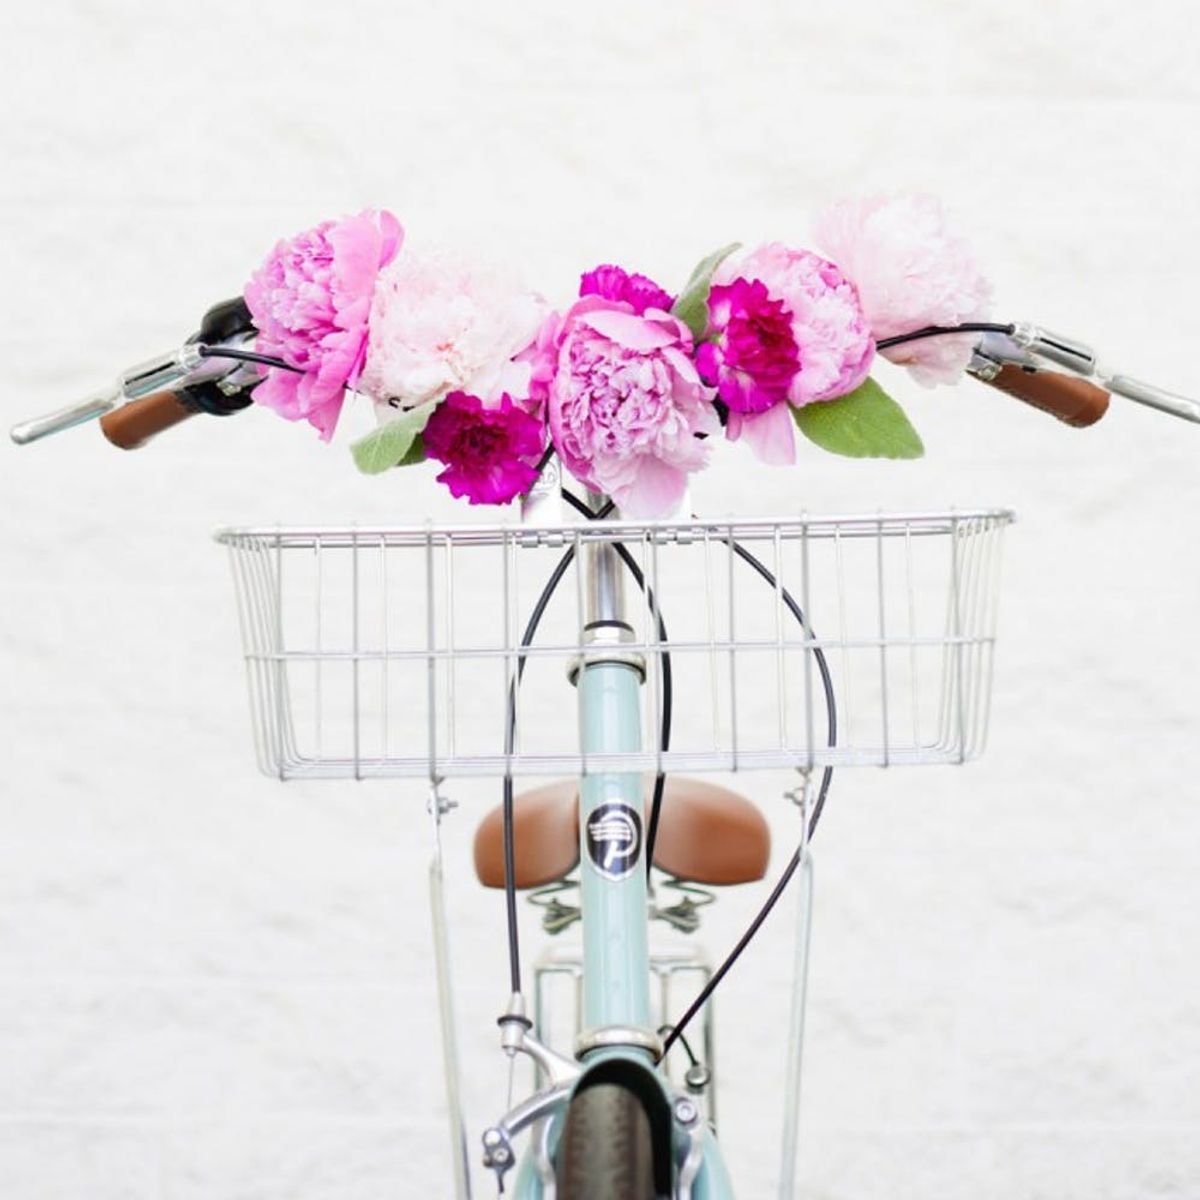 What to Make This Weekend: A Lilly Pulitzer Scarf, Floral Bike Handlebars + More